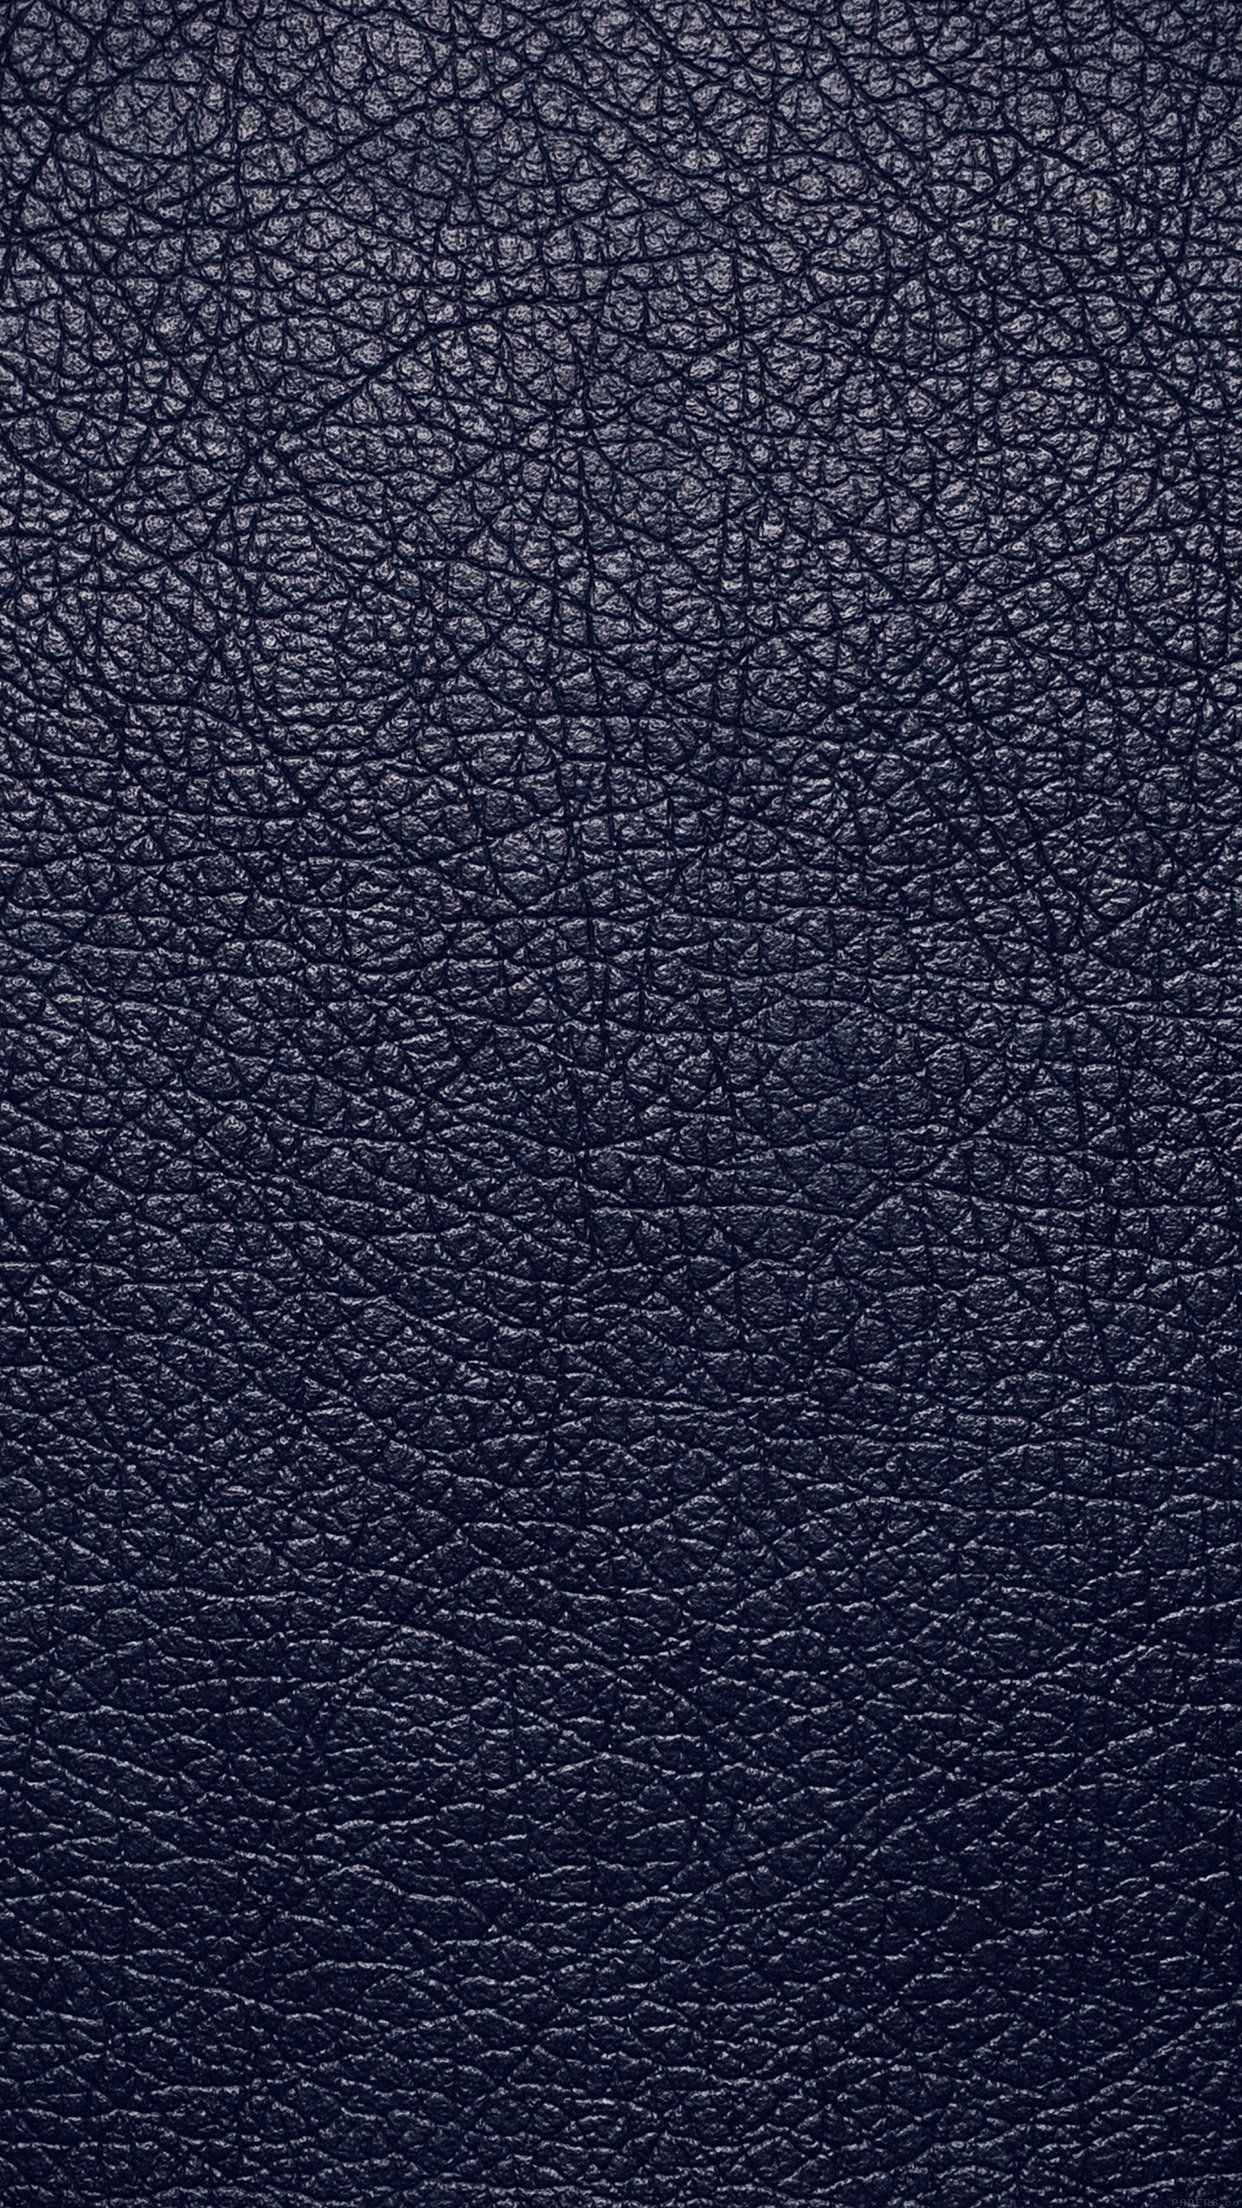 best image about Leather background Bellinis. Black wallpaper, Leather texture, iPhone background image